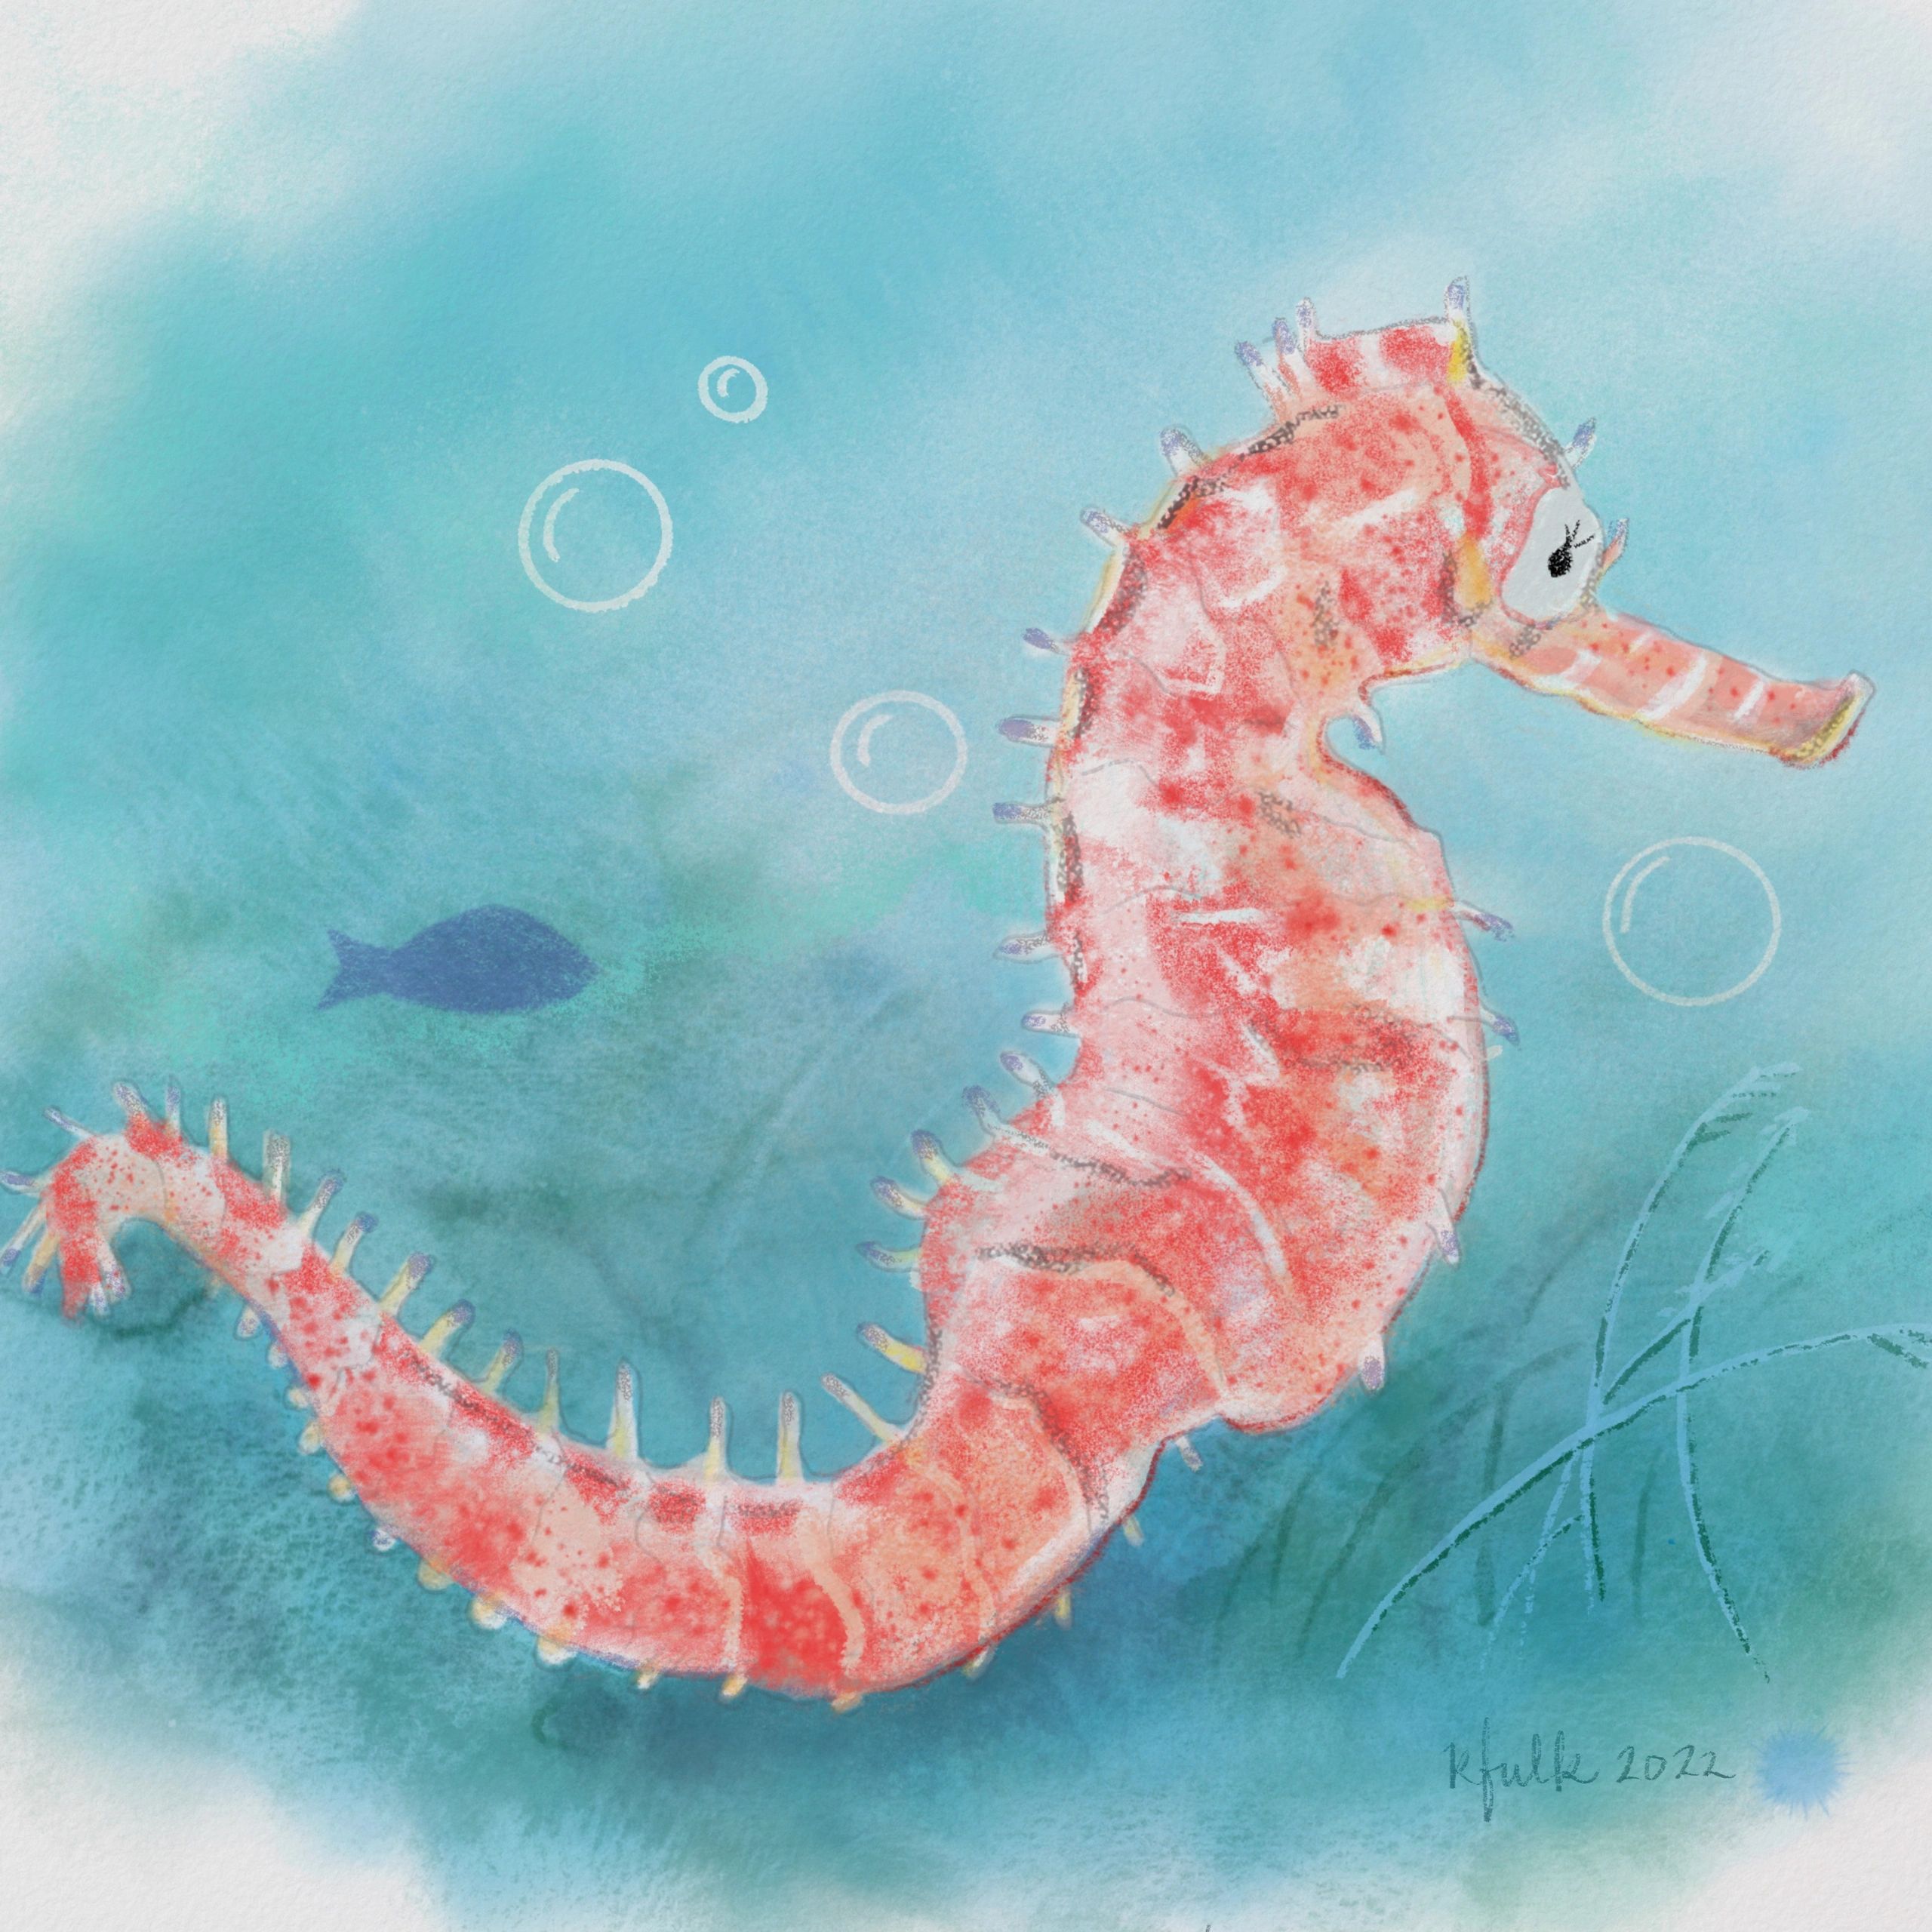 A drawing of a red and orange seahorse in the ocean.